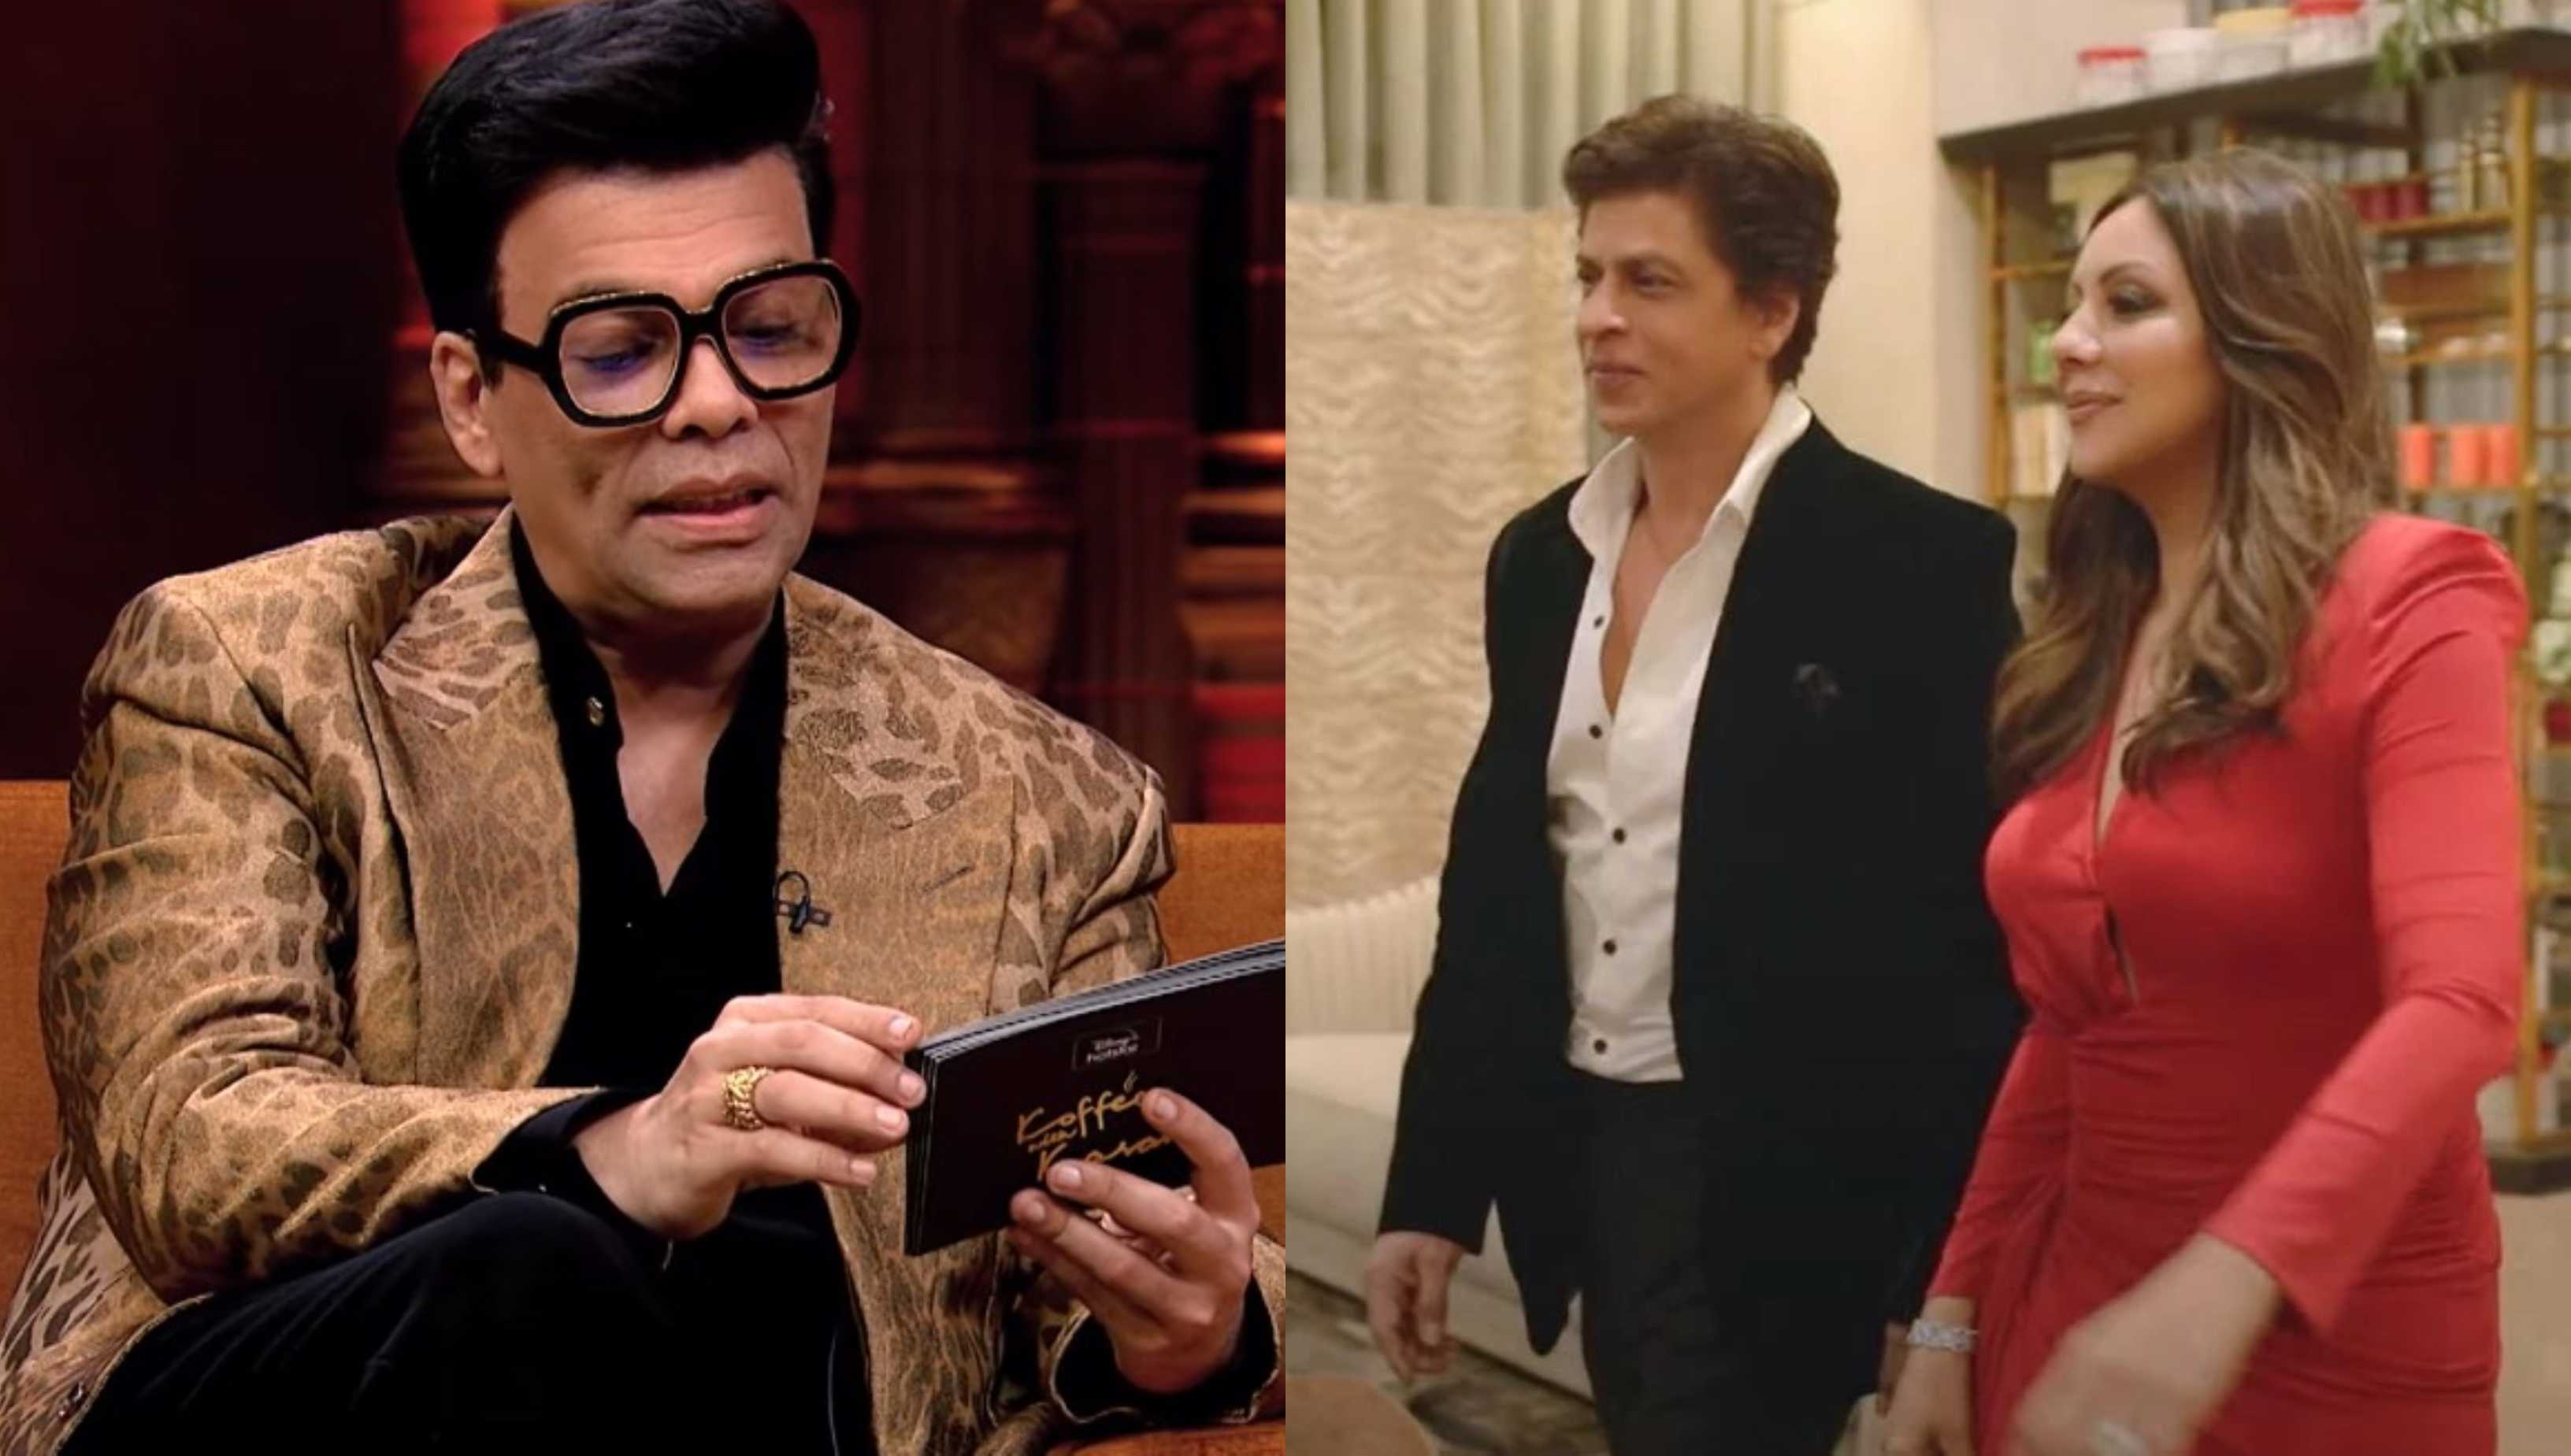 Koffee With Karan 7: From Gauri’s dating advice for Suhana to Shah Rukh’s cameo, why this episode could be ‘fabulous’